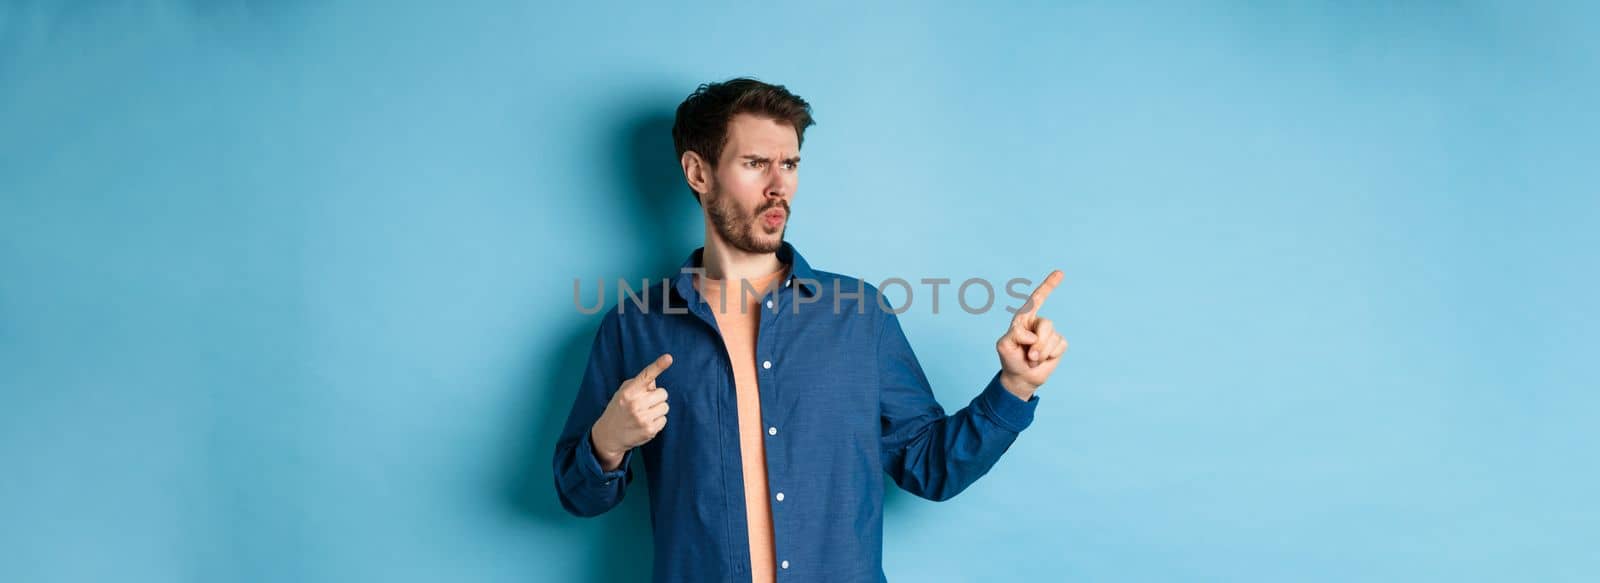 Confused and annoyed guy pointing and looking left at empty space with angry frowning face, standing on blue background.